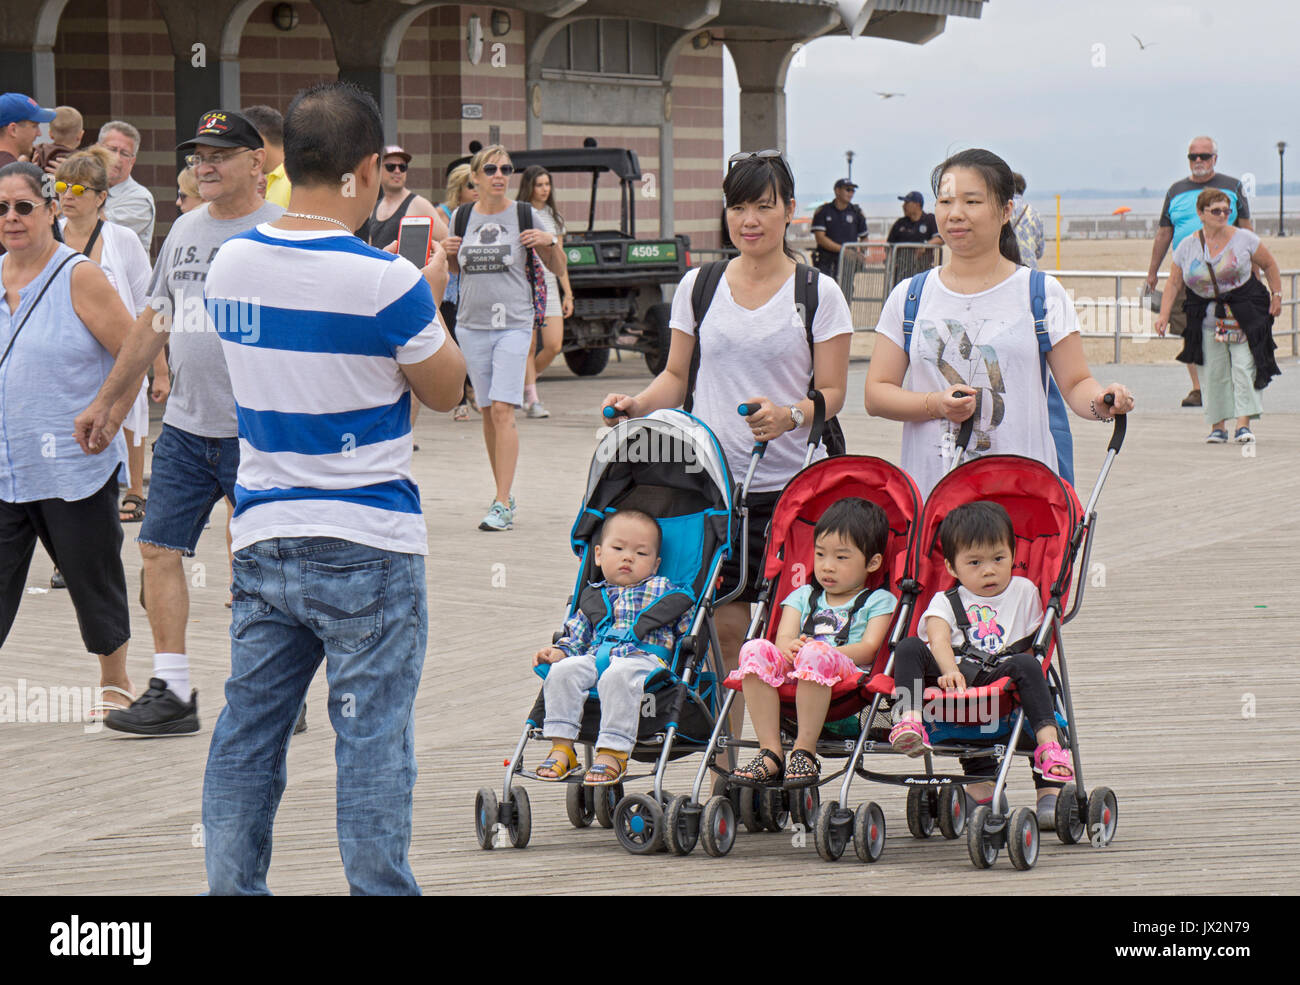 An Asian family taking cell phone photos of their very cute children on the boardwalk in Consy Island, Brooklyn, New York. Stock Photo